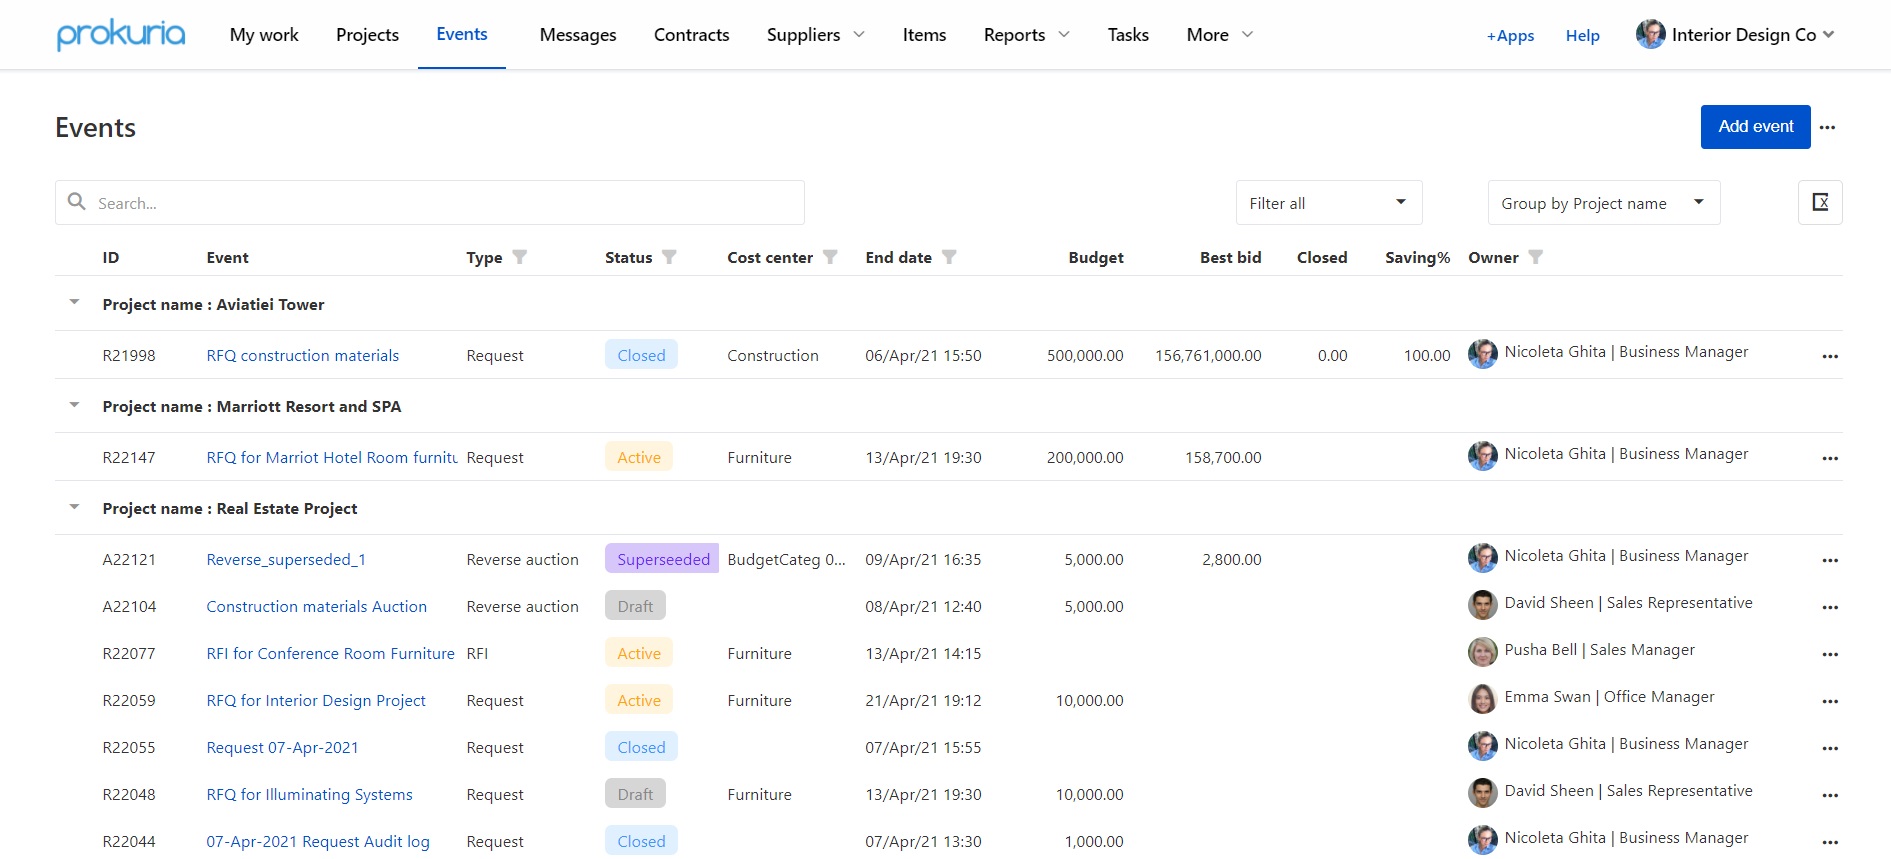 A dashboard provides a centralized overview of all requests